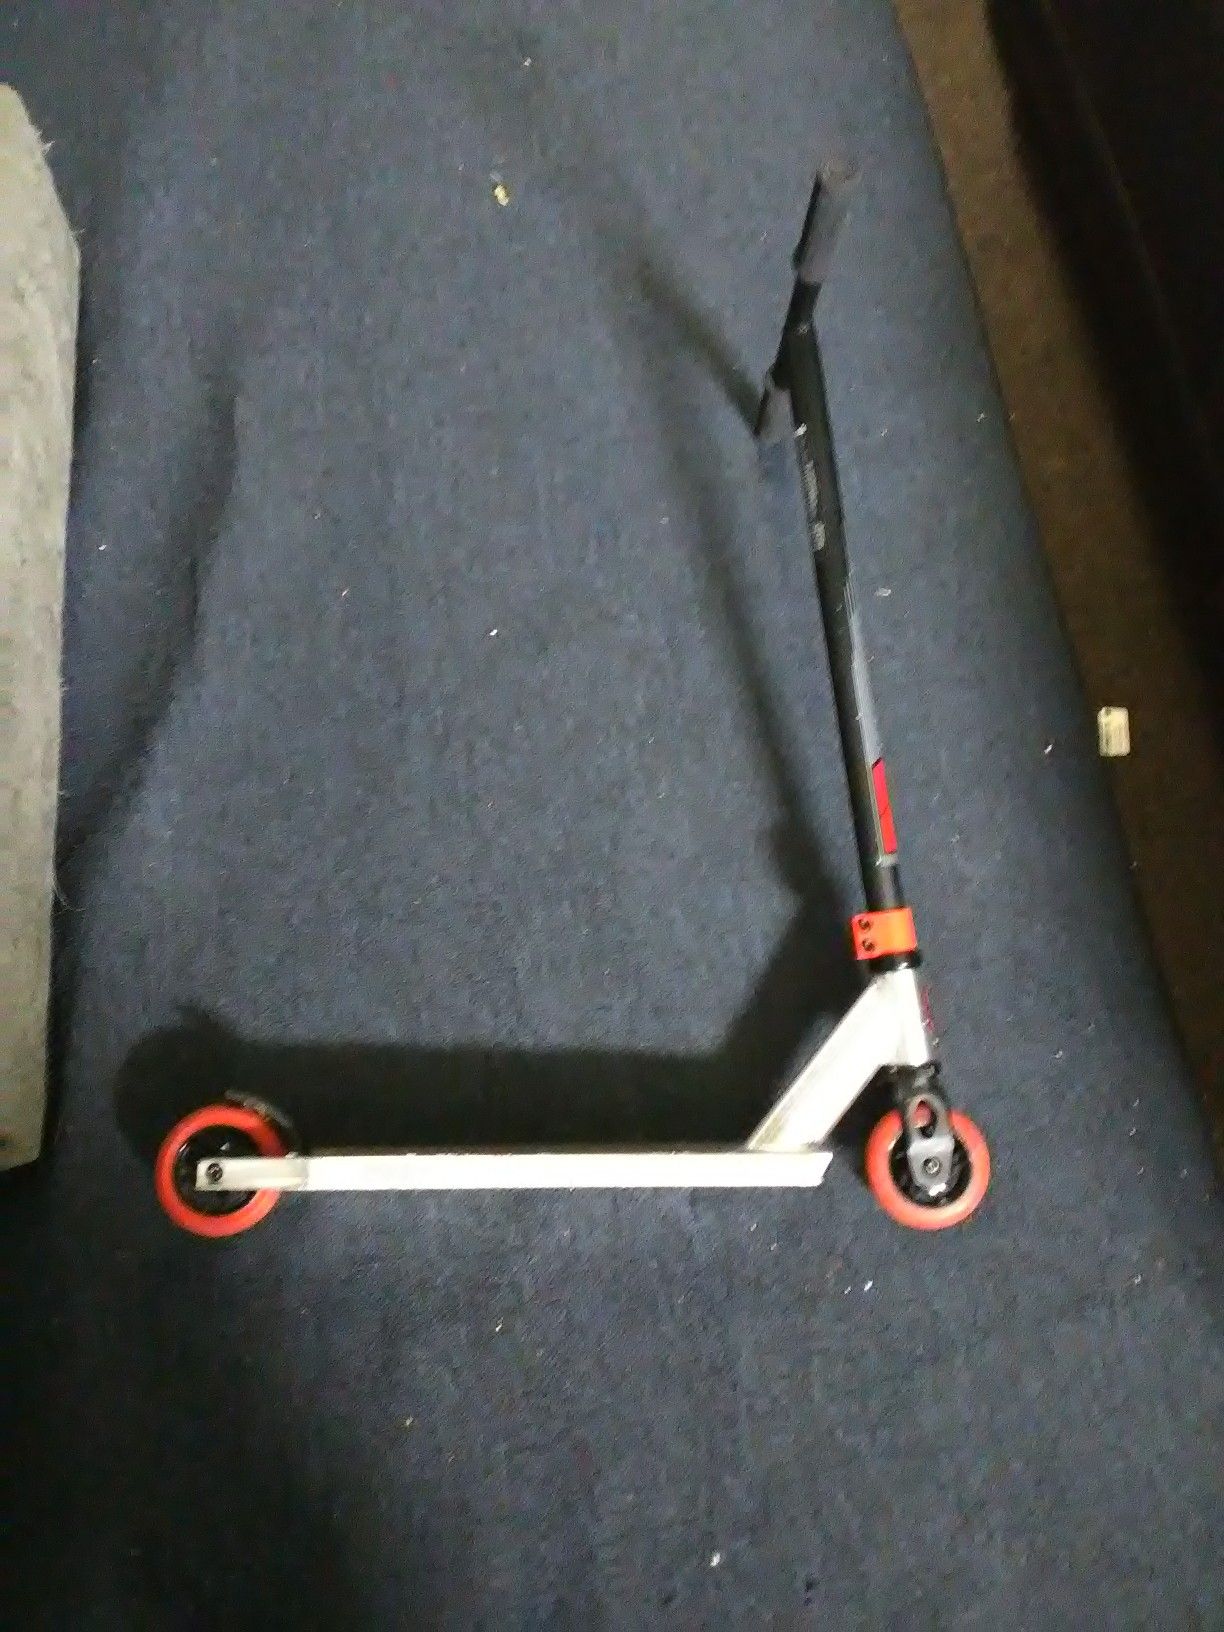 Madd gear pro scooter..